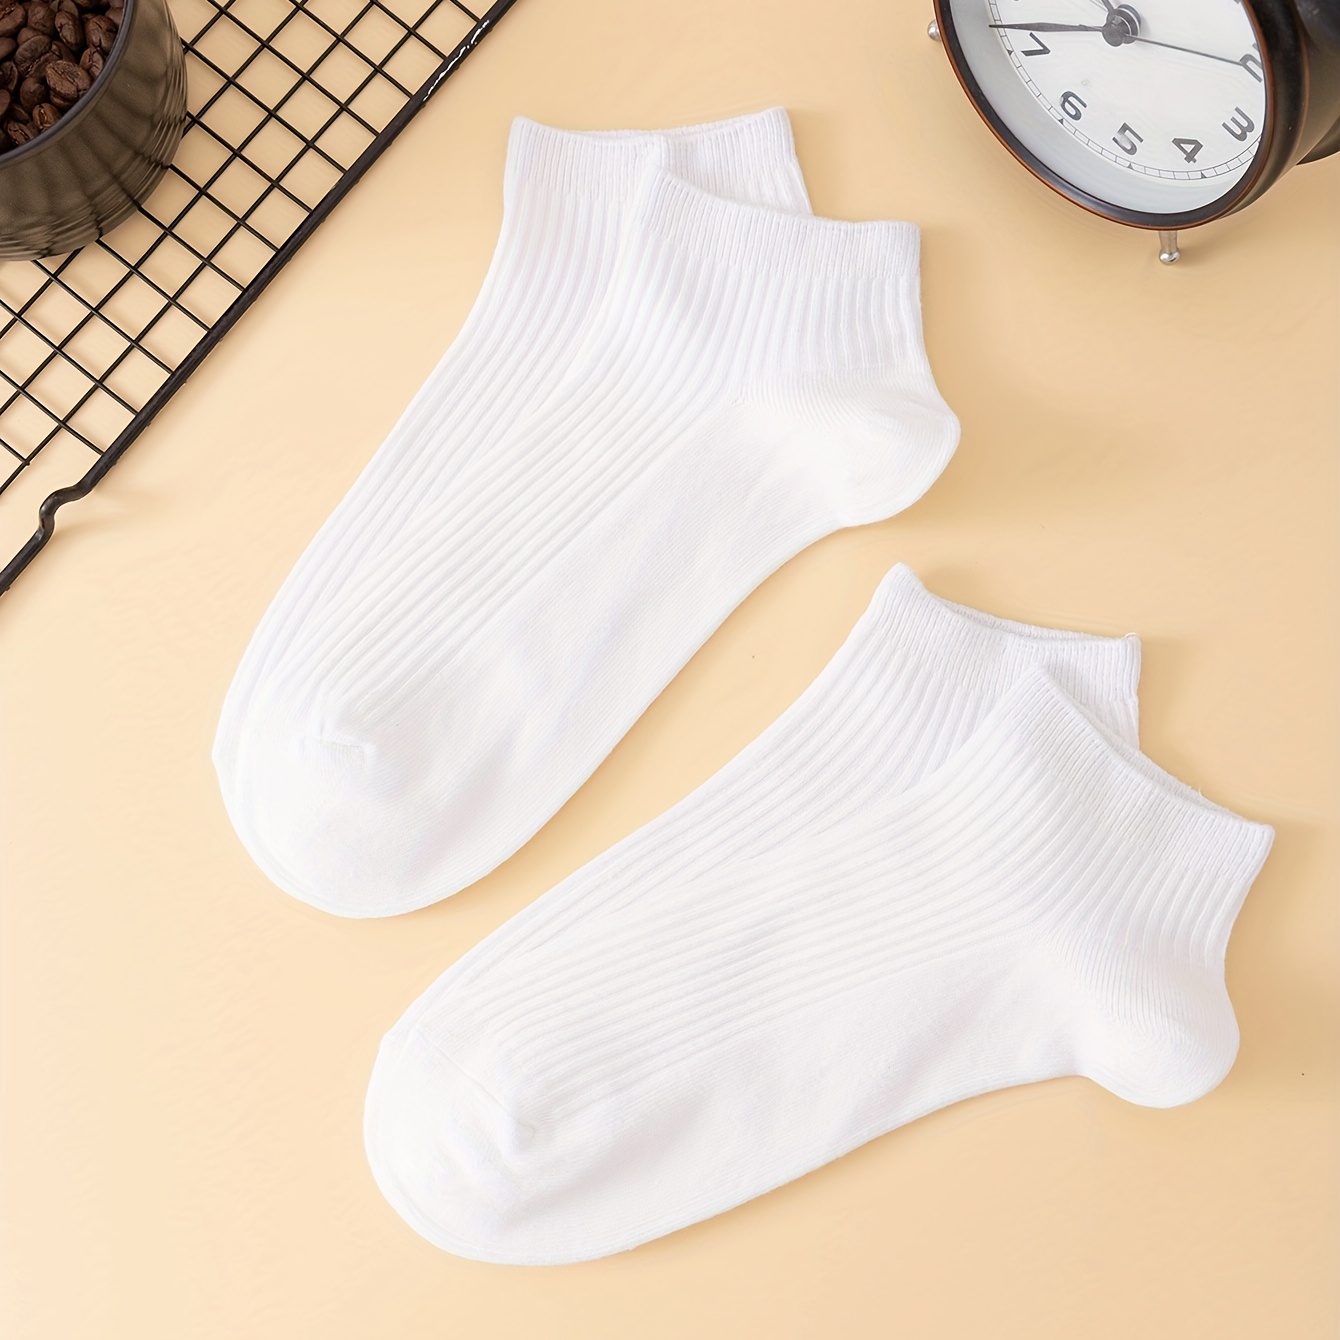 Low Cut Ankle Socks - 2 Pairs